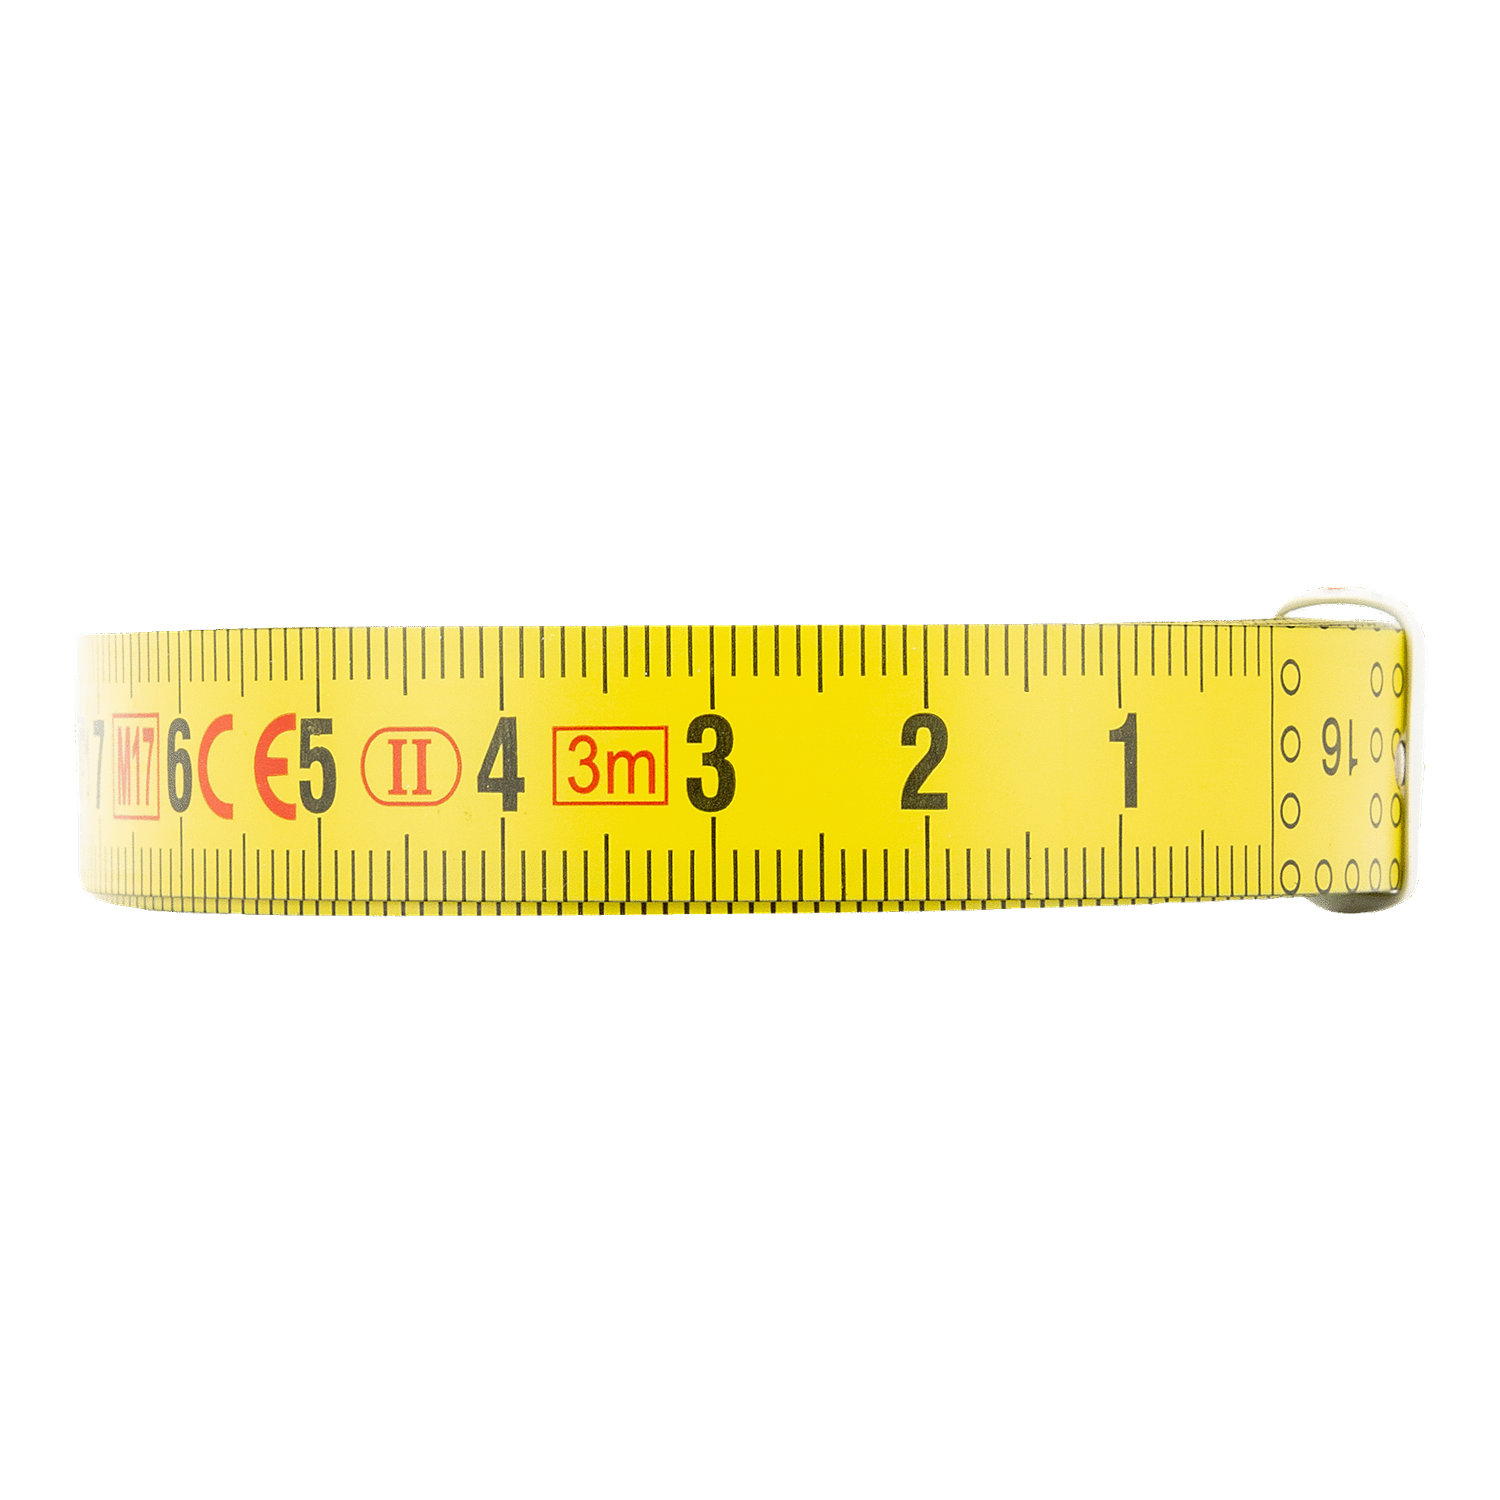 BAHCO BT Adhesive Steel Bench Measuring Tape (BAHCO Tools) - Premium Measuring Tape from BAHCO - Shop now at Yew Aik.